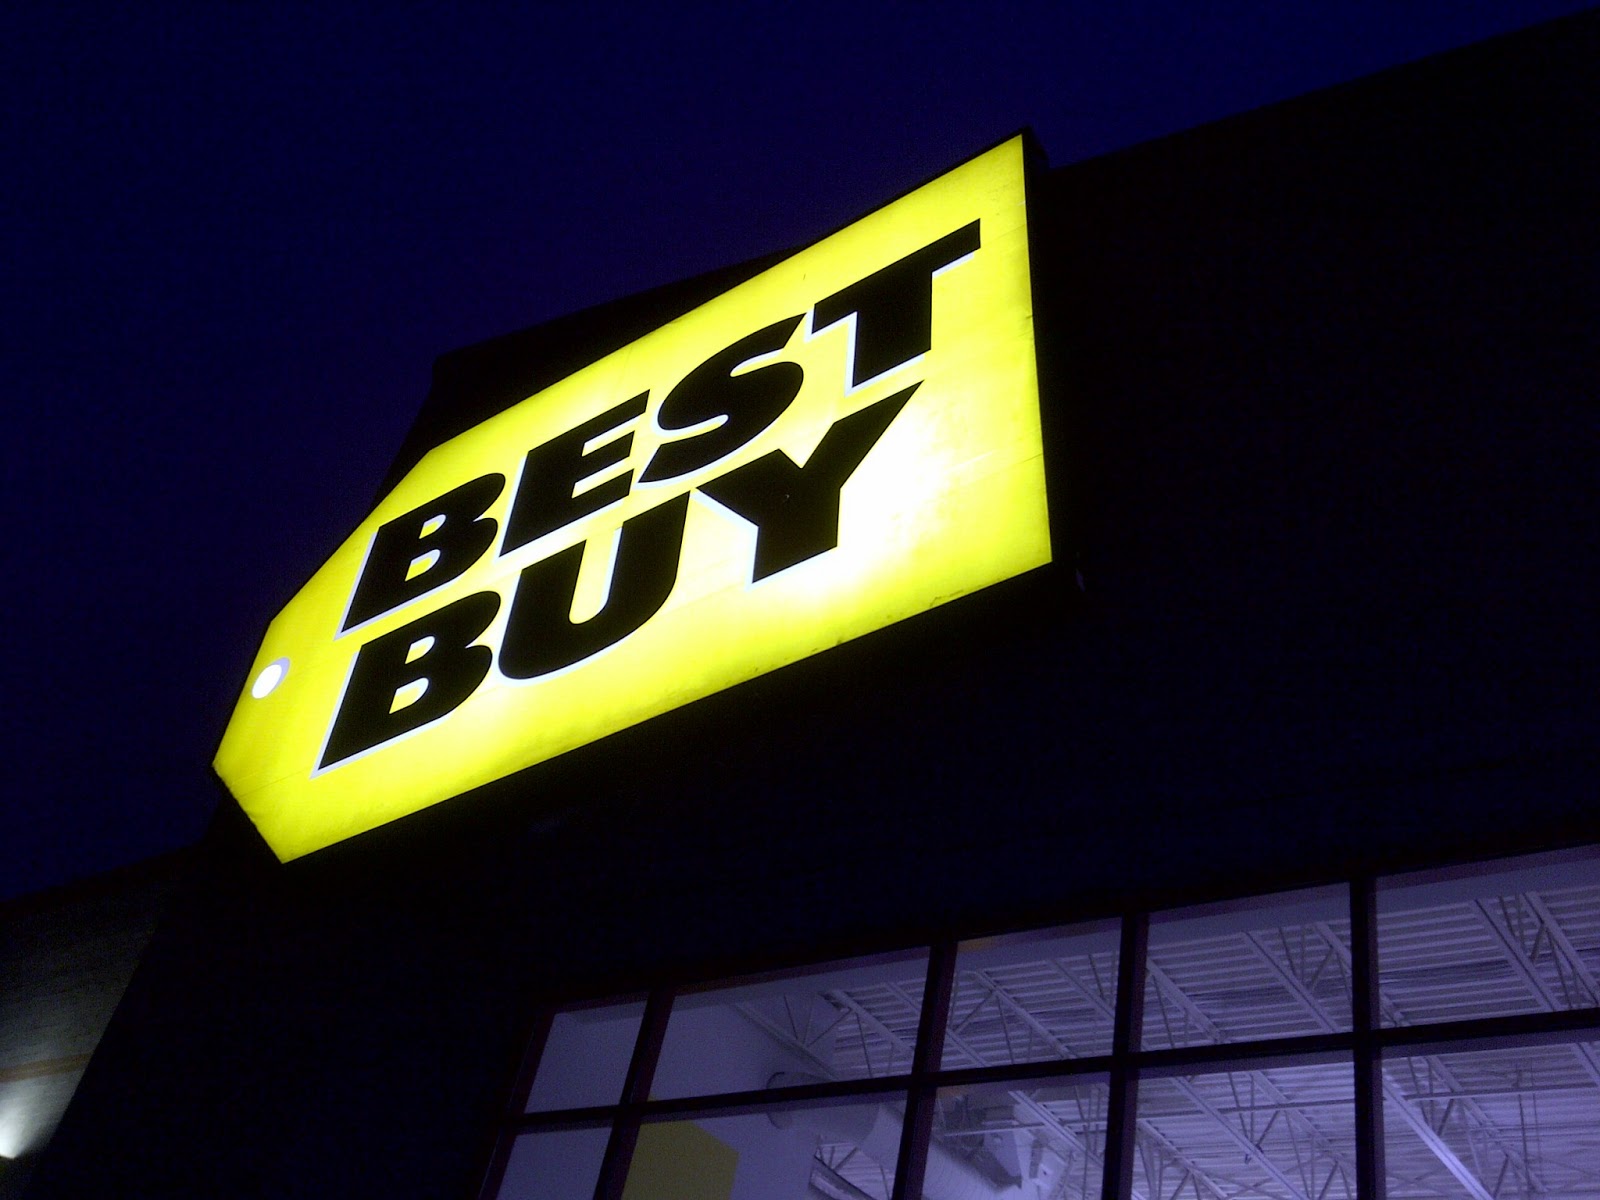 Electronics stores such as Best Buy will buy used cell phones for cash